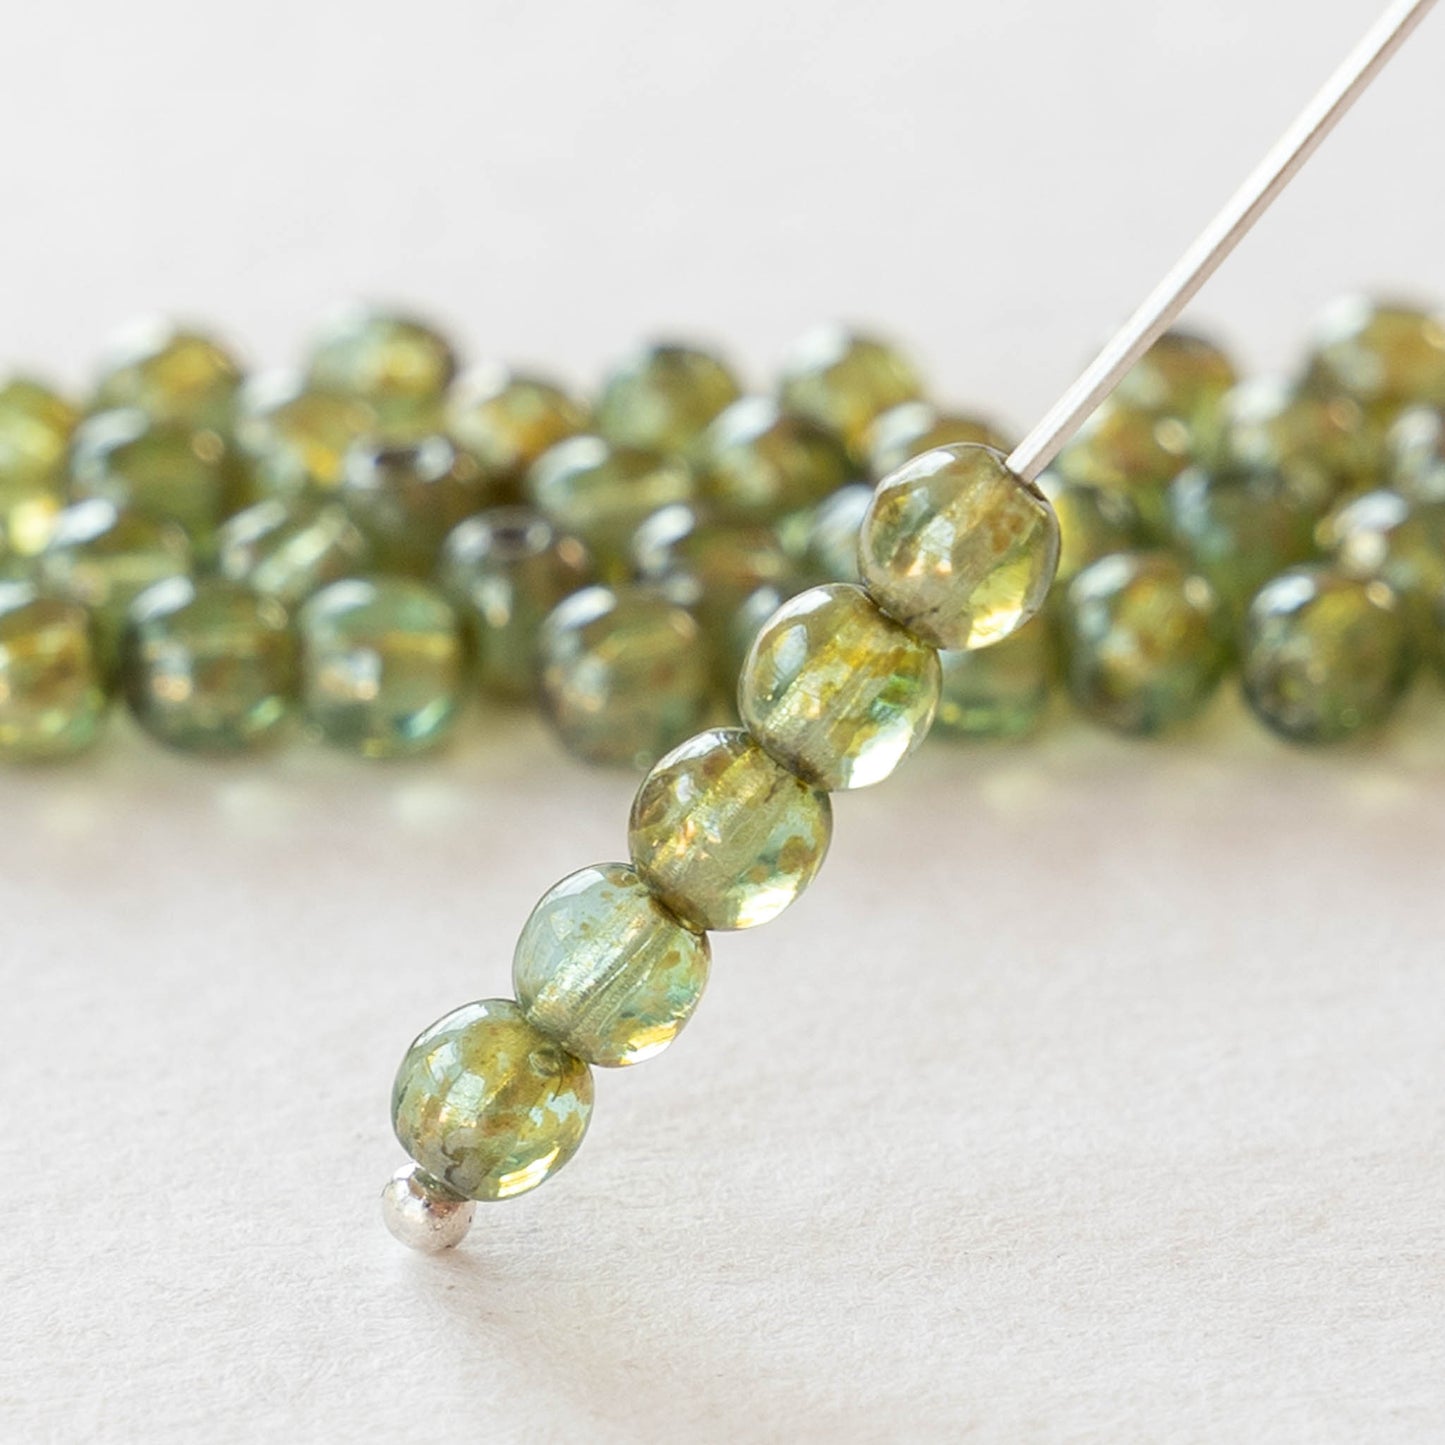 Load image into Gallery viewer, 4mm Round Glass Beads - Sage with Picasso Finish - 50 Beads
